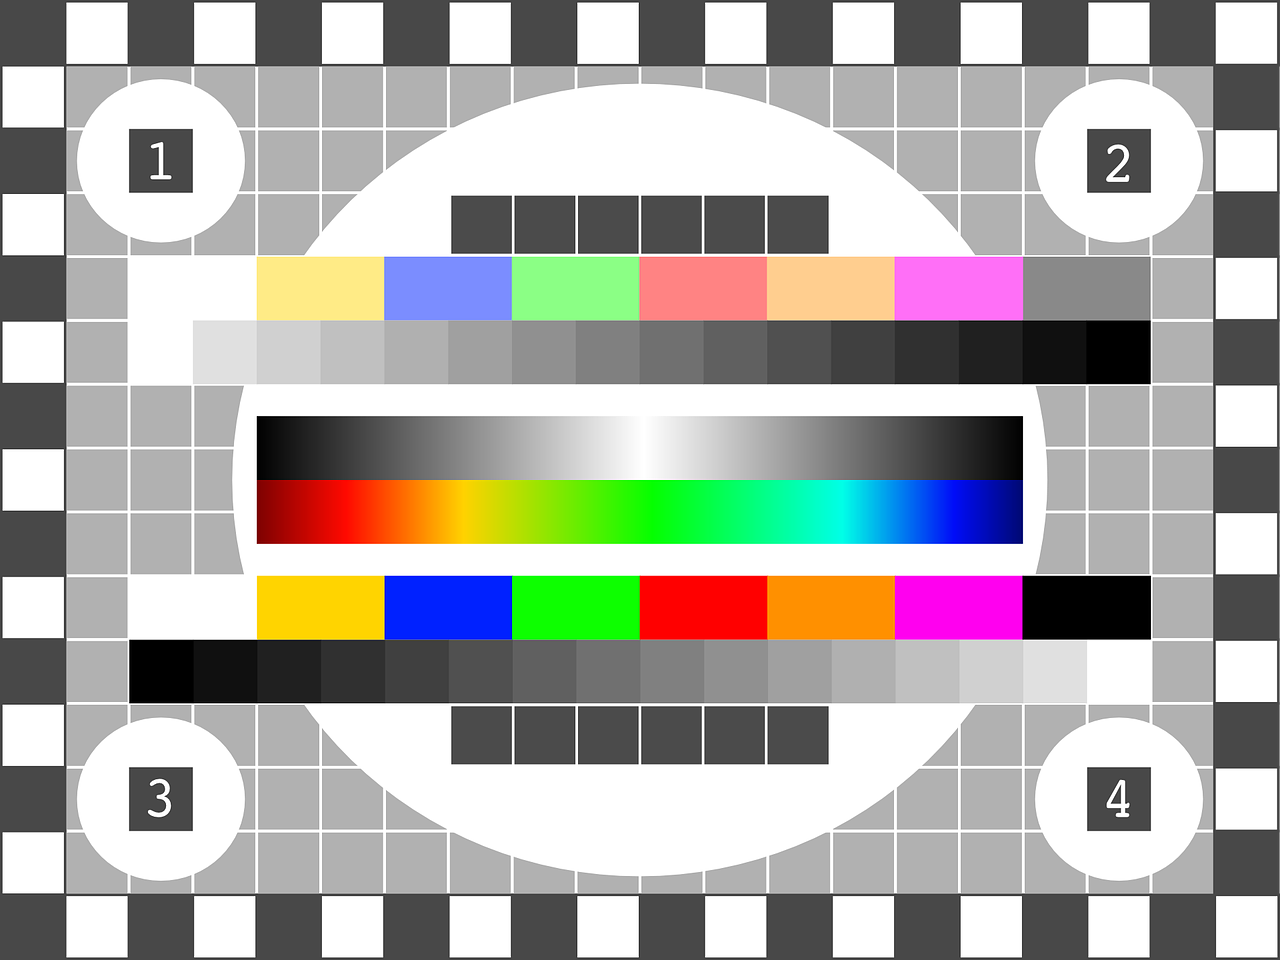 A test pattern, used to test broadcast TV definition and the fidelity of a video screen.